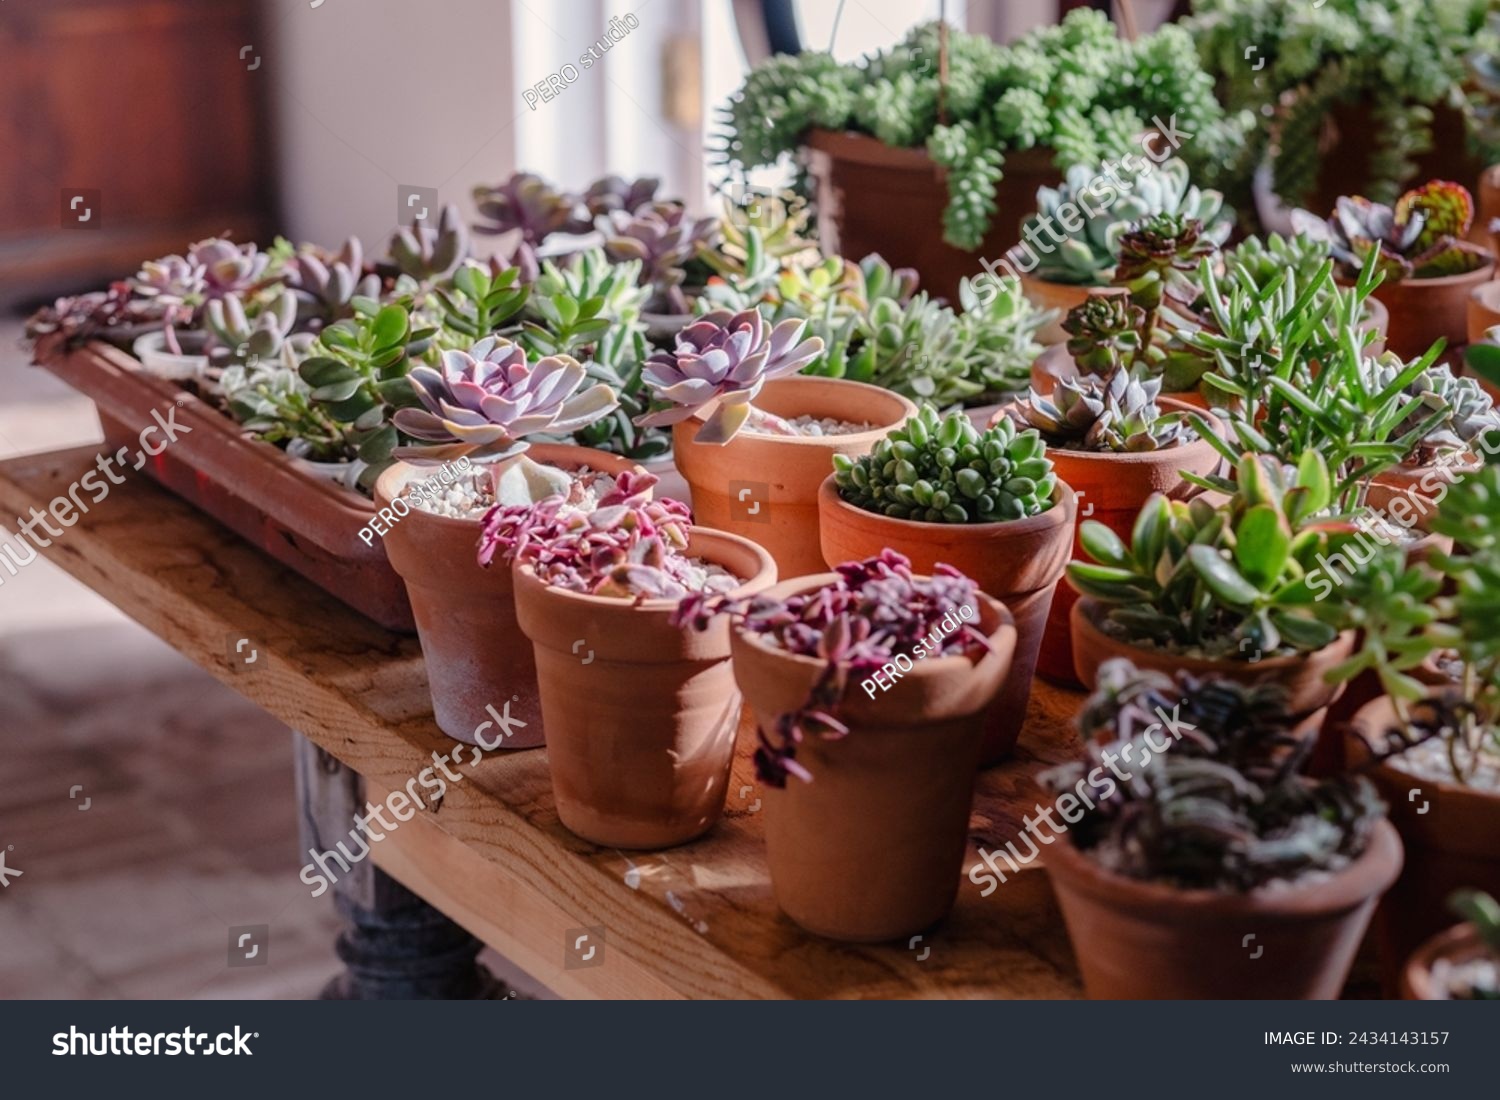 Various succulent plants in terracotta pots bask in natural light on a wooden table, showcasing an indoor gardening scene.  #2434143157